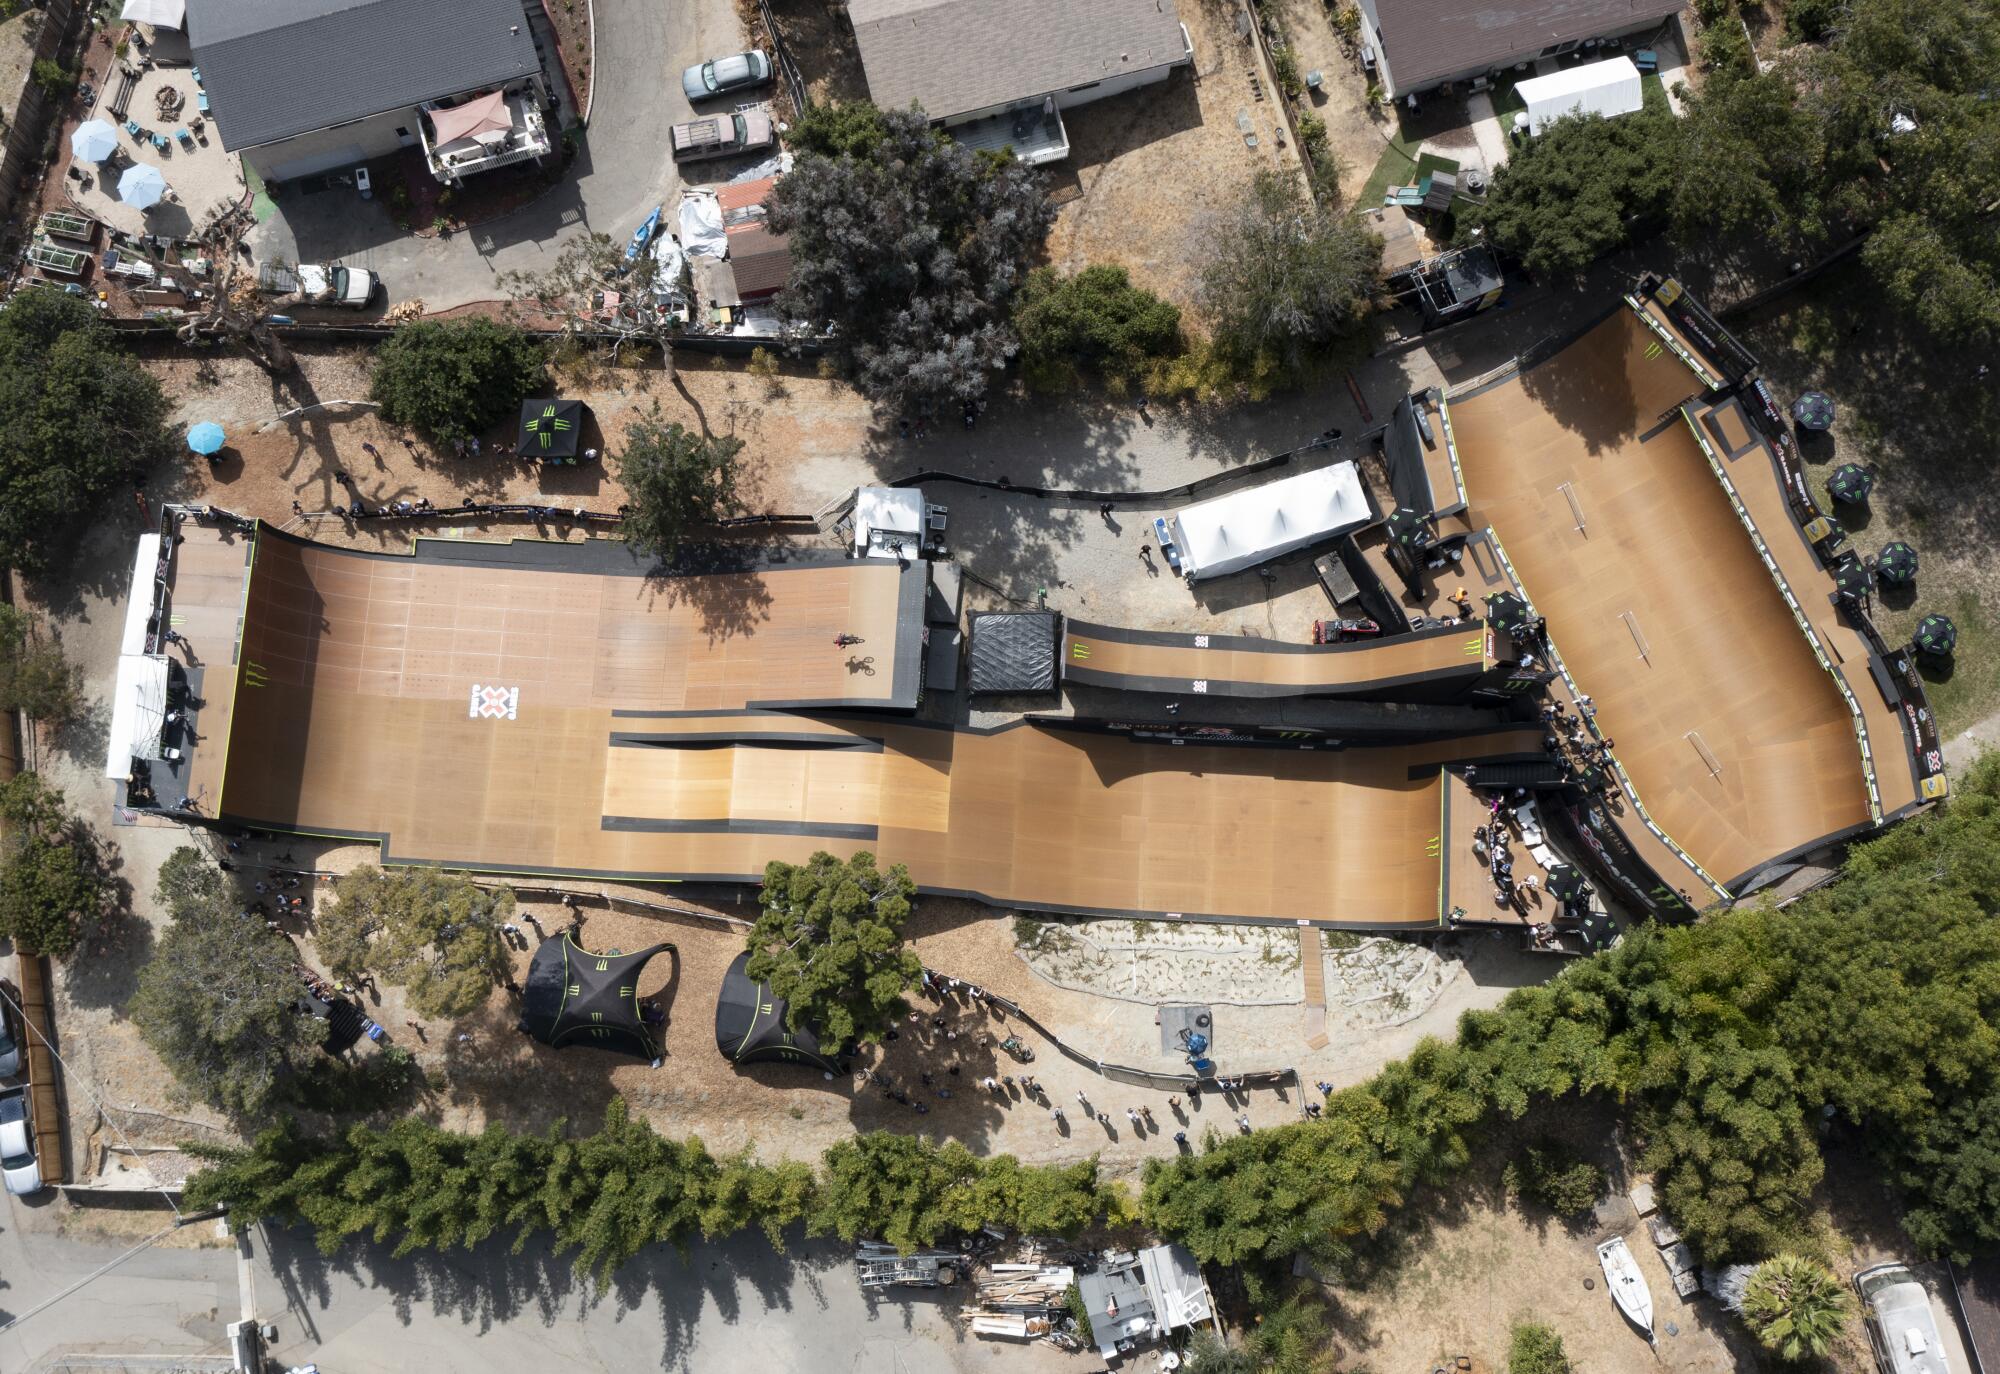 The X Games opened at the Sloanyard, a private skateboard compound at the home of skateboarder Elliot Sloan in Vista, Calif.